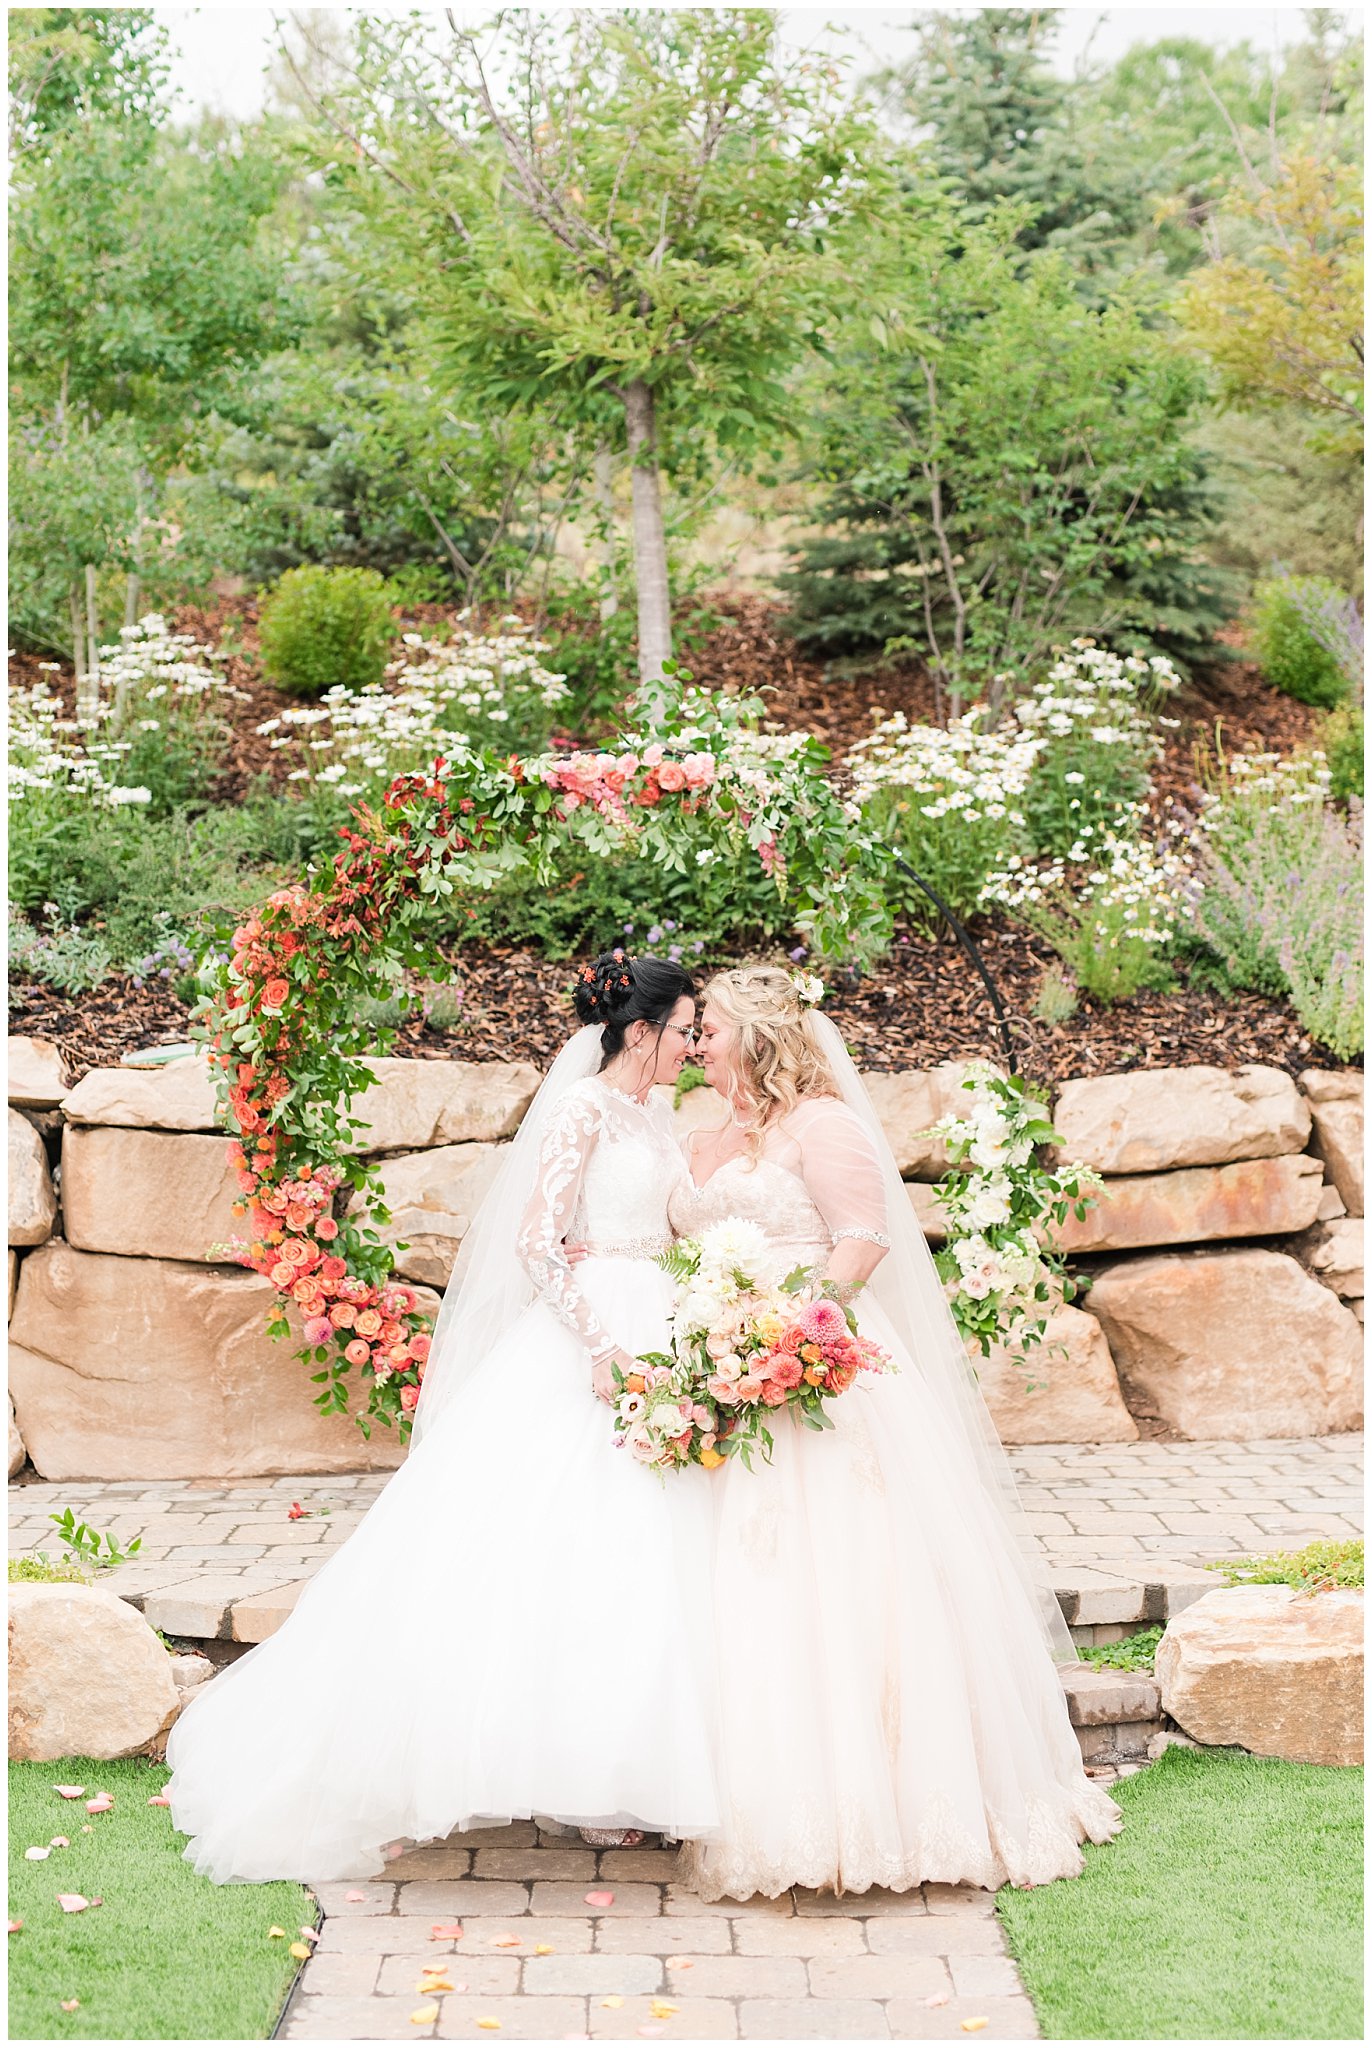 Wedding portraits during butterfly wedding with sunset colors | Park City Wedding at the Hyatt Centric | Jessie and Dallin Photography